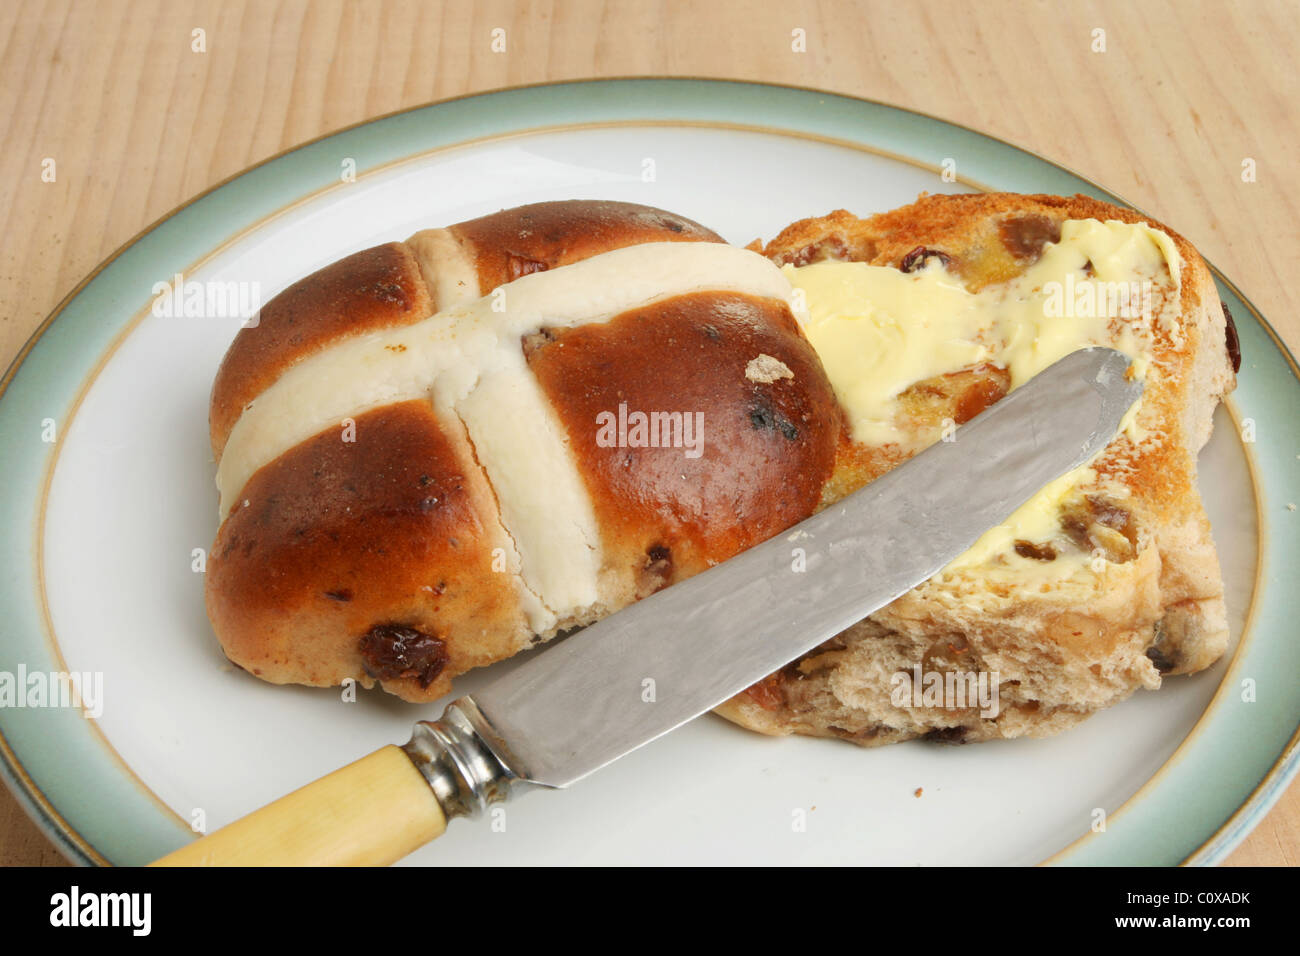 Toasted and buttered hot cross bun with a knife on a plate Stock Photo